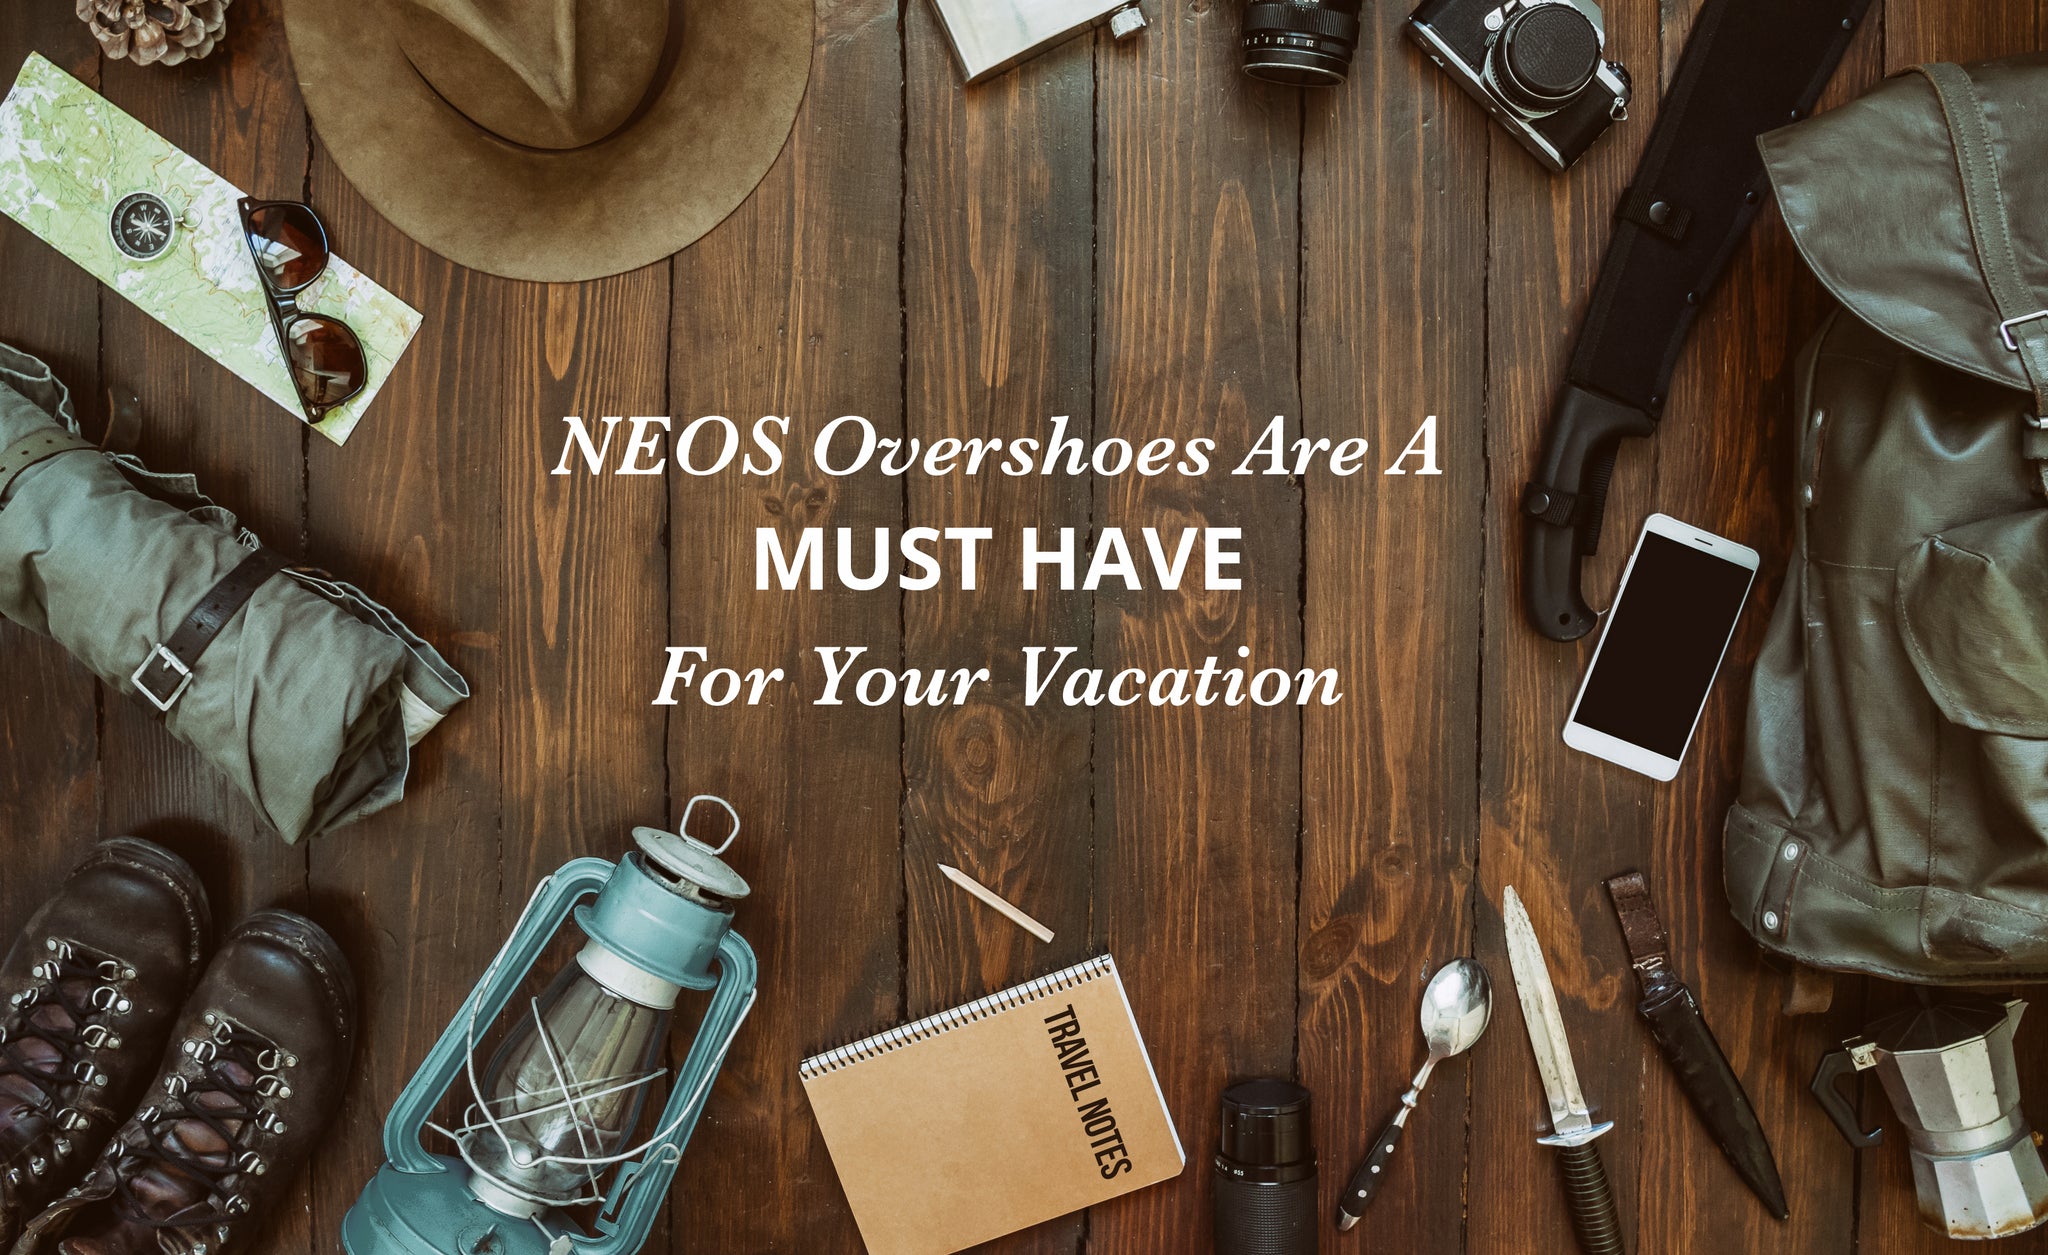 NEOS Are A Must Have For Your Vacation